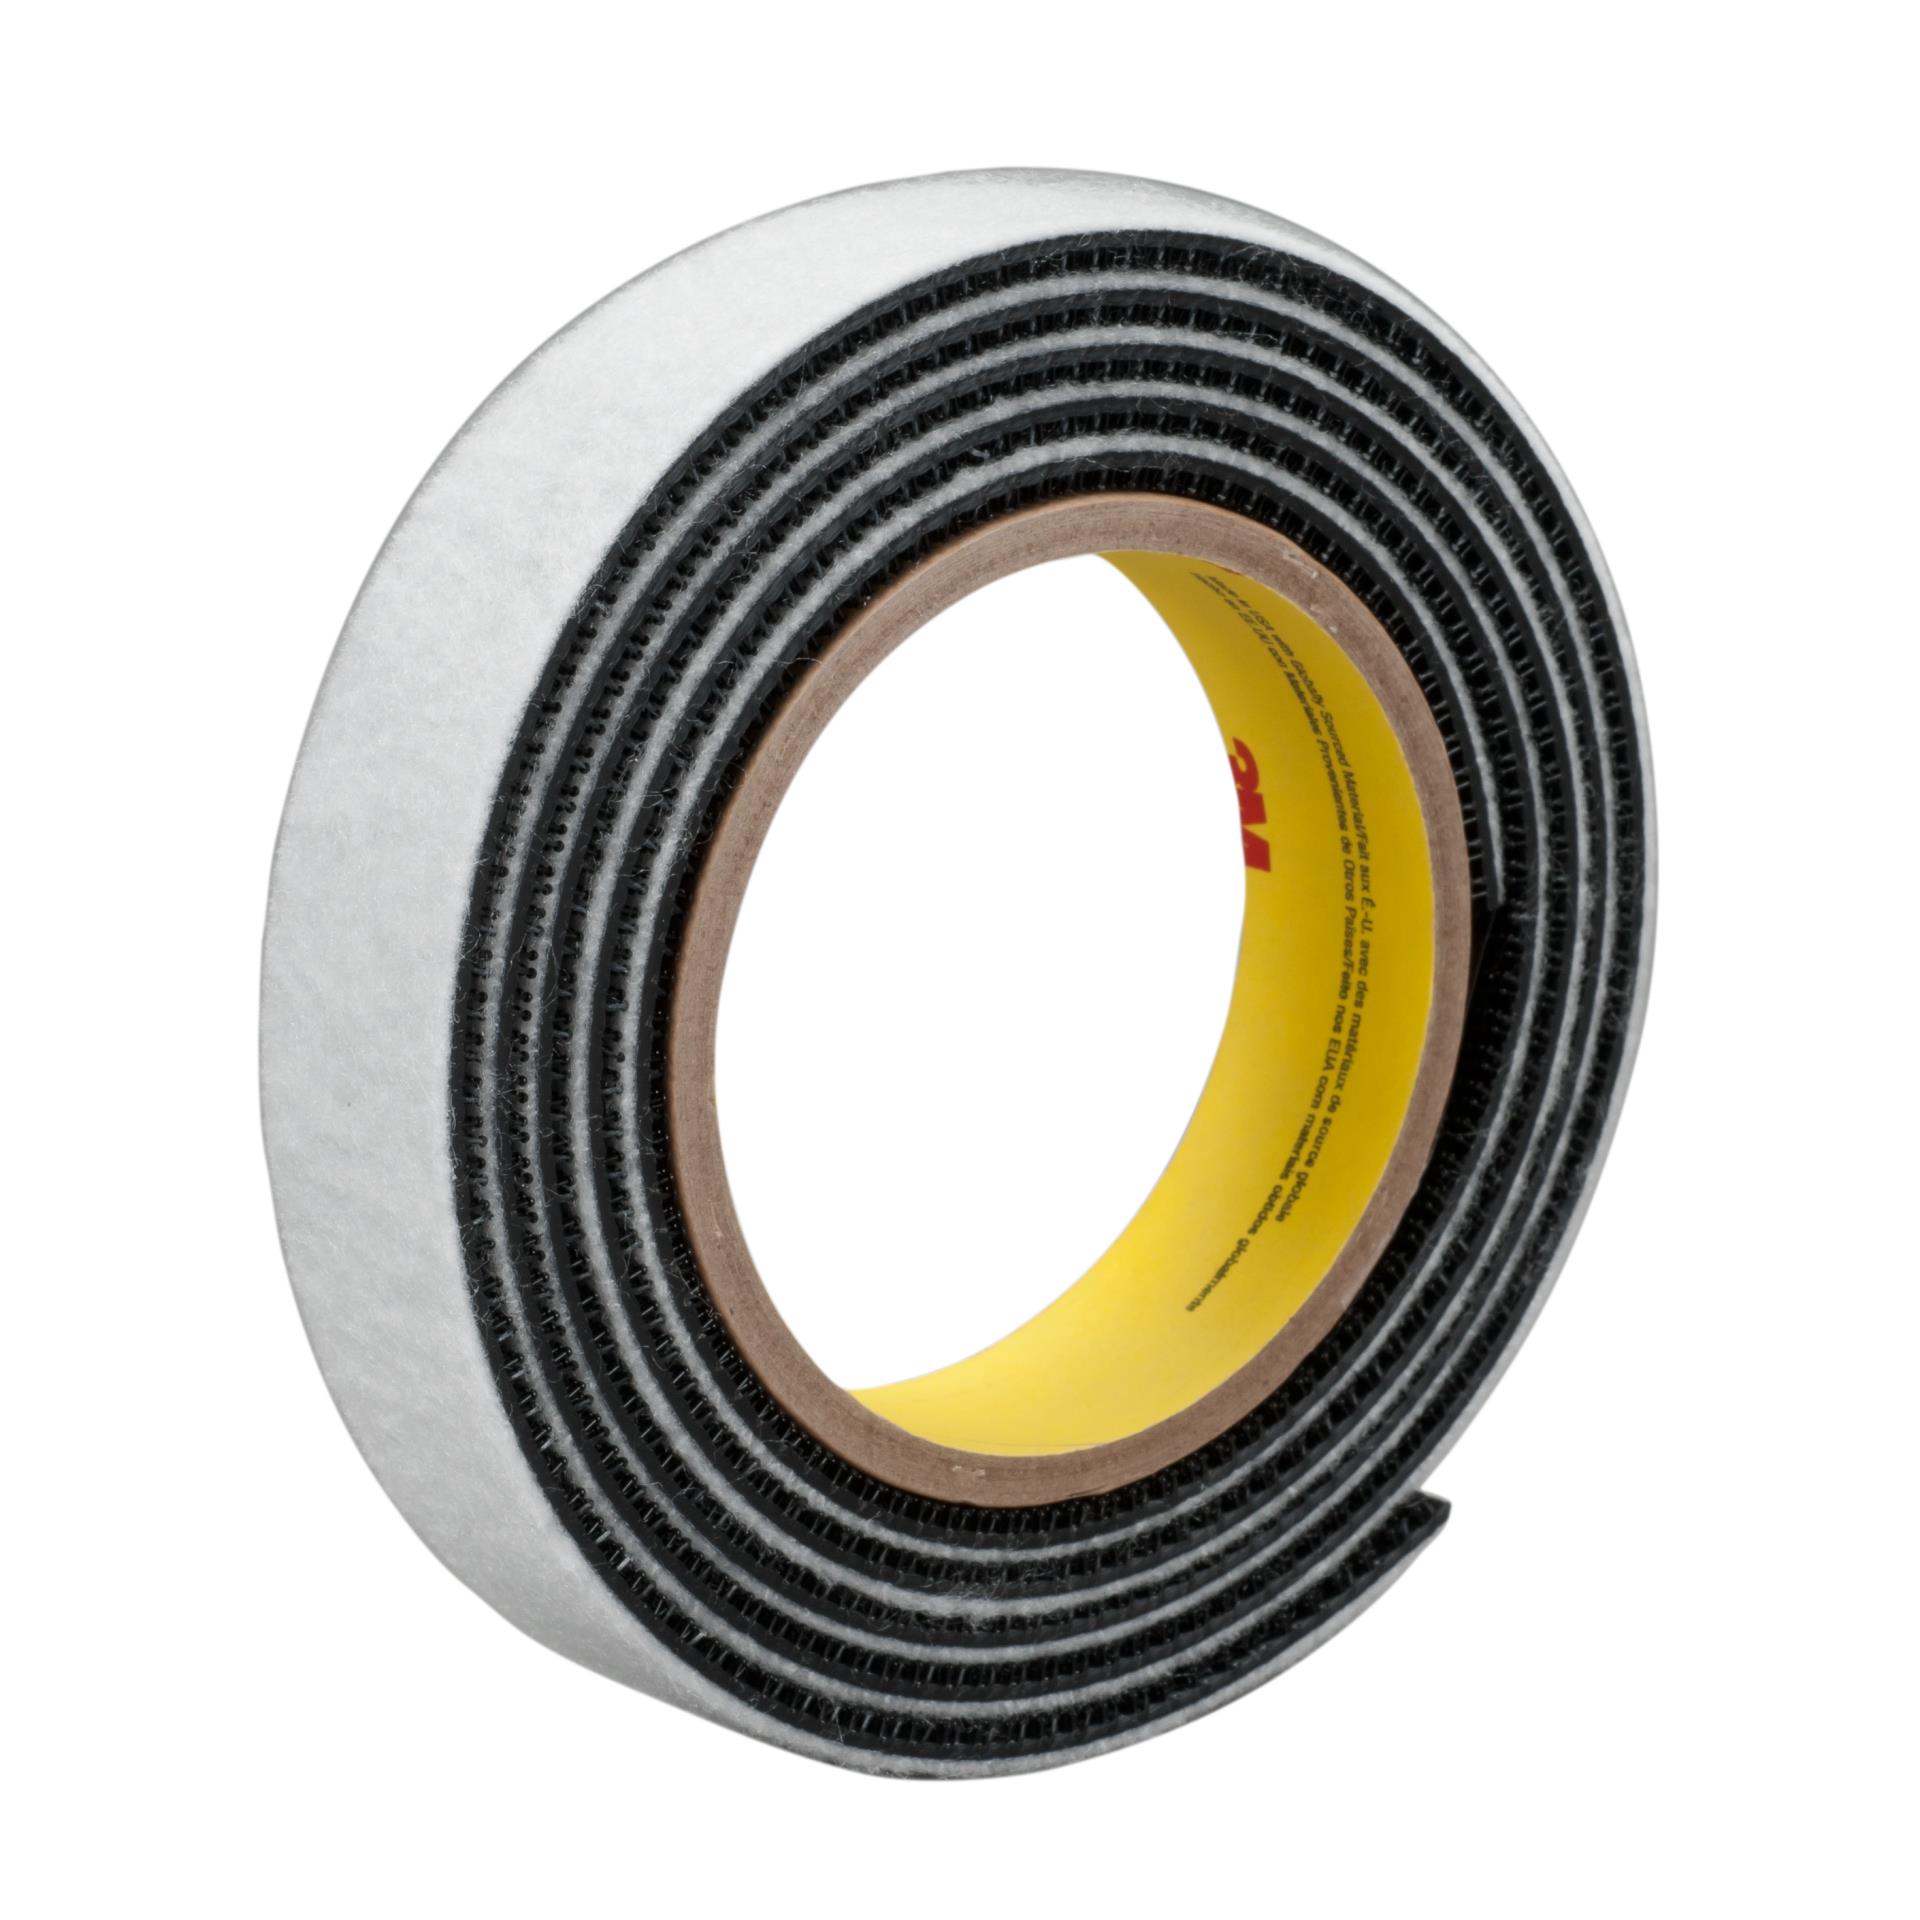 3M A0107 Retaining Ring Business & Industrial External Retaining ...